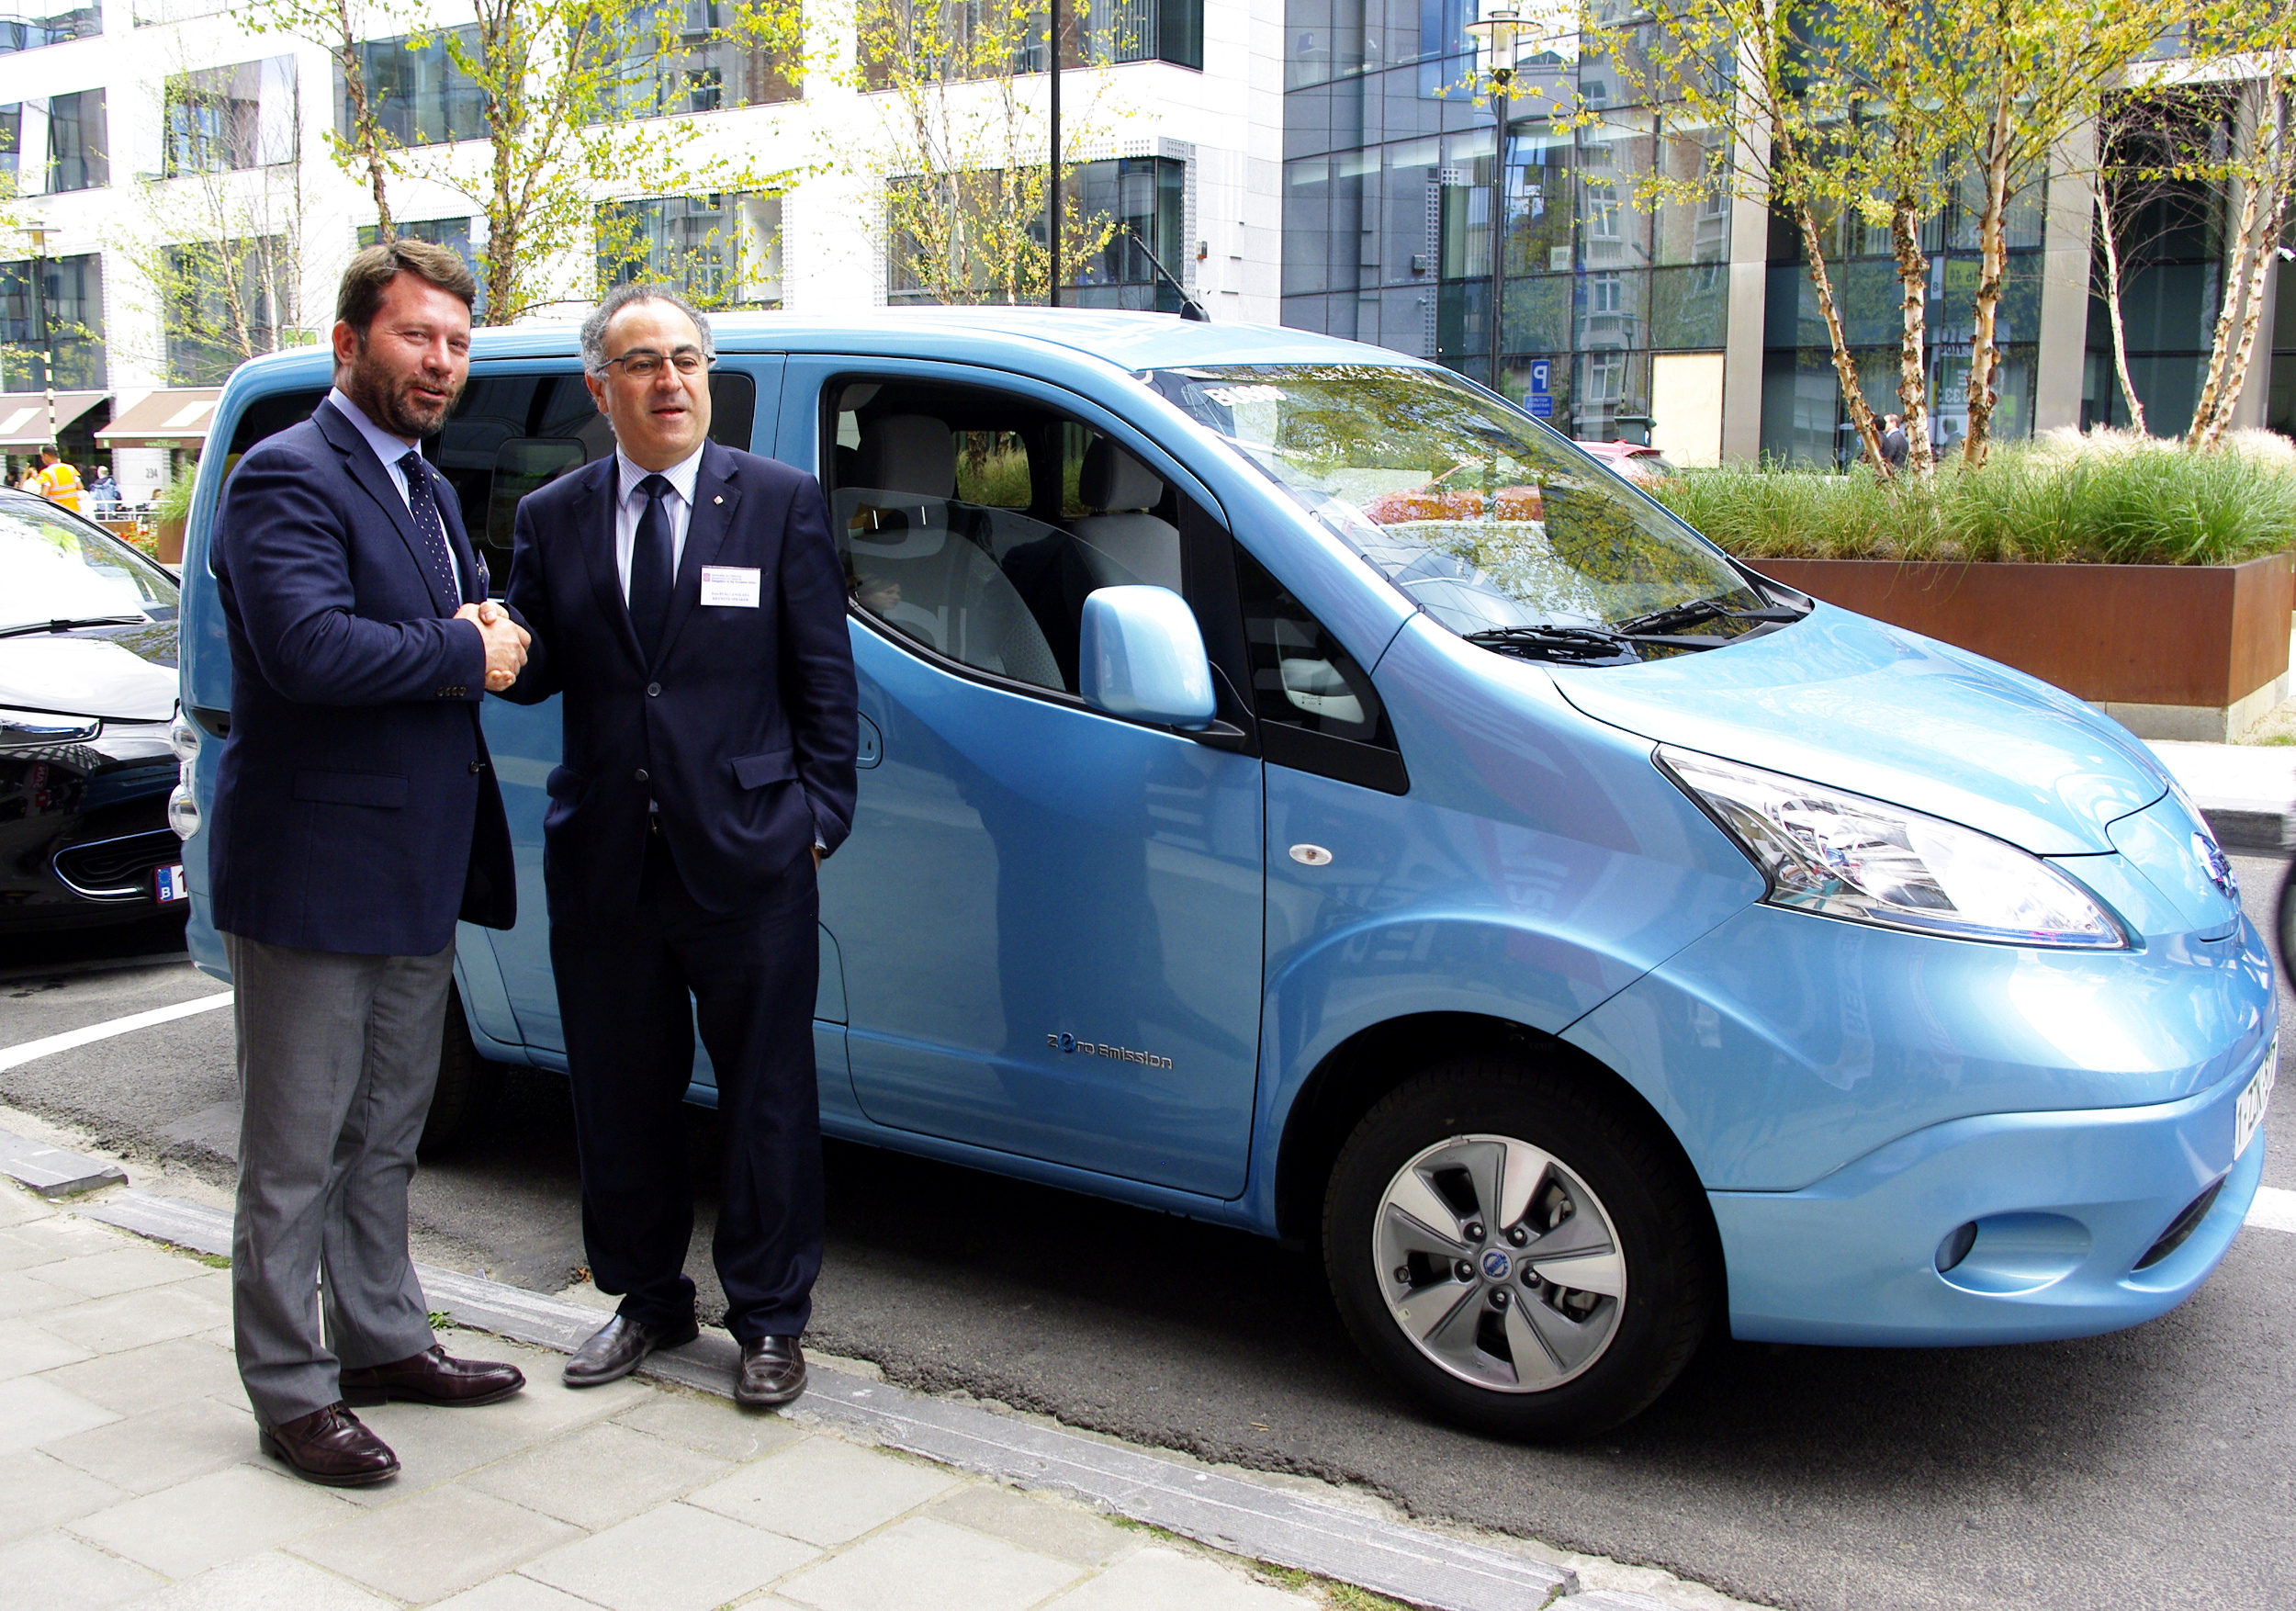 The Communications Director of Nissan Iberia,  Francesc Corberó, and the Catalan Delegate to the EU, Pere Puig, shake hands in front of an electric van (by ACN)